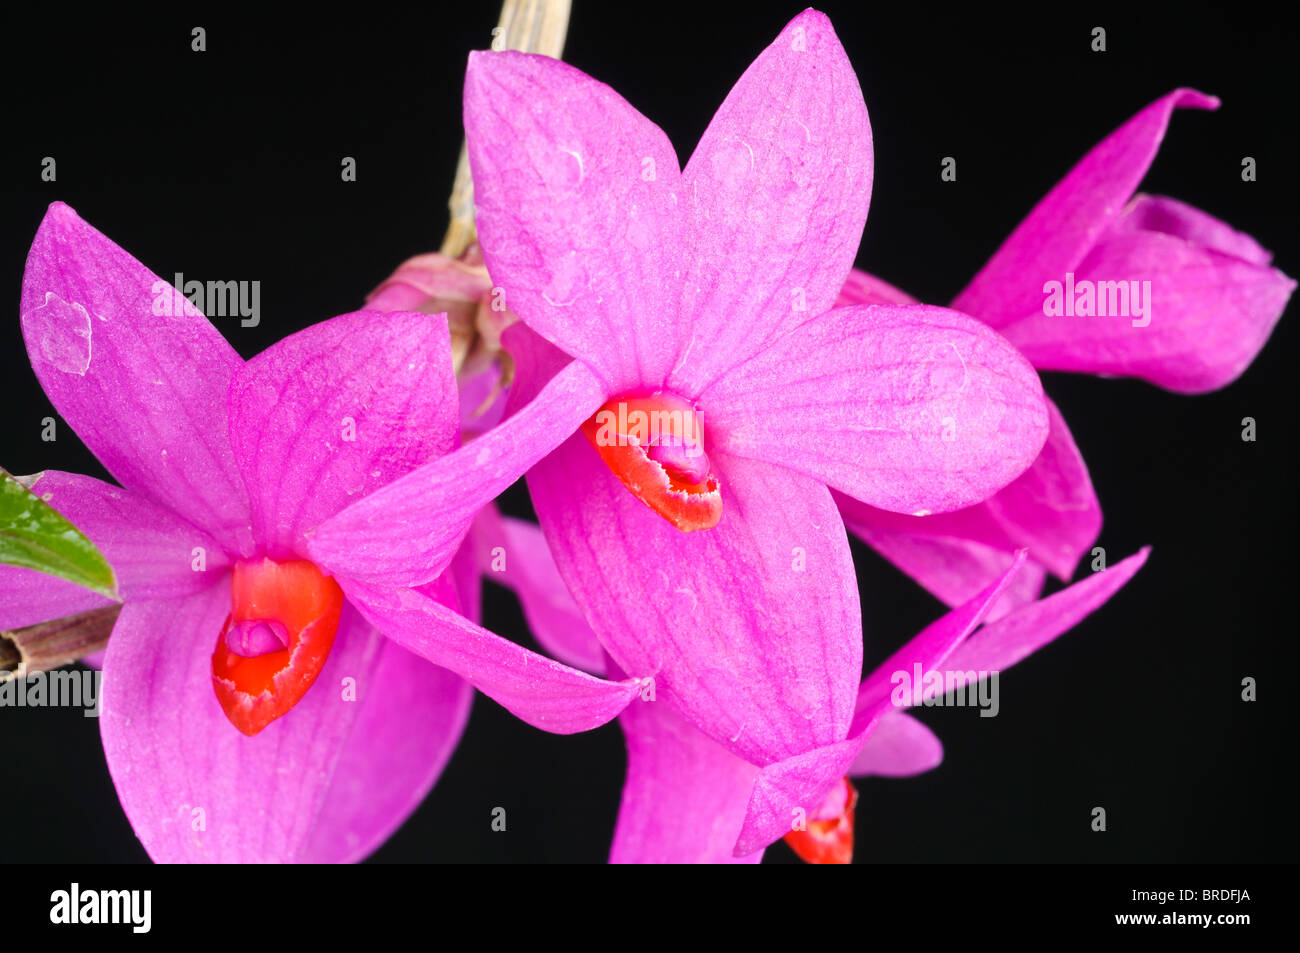 Dendrobium sulawesiense, orchid species, native to Sulawesi region of Indonesia; black background Stock Photo